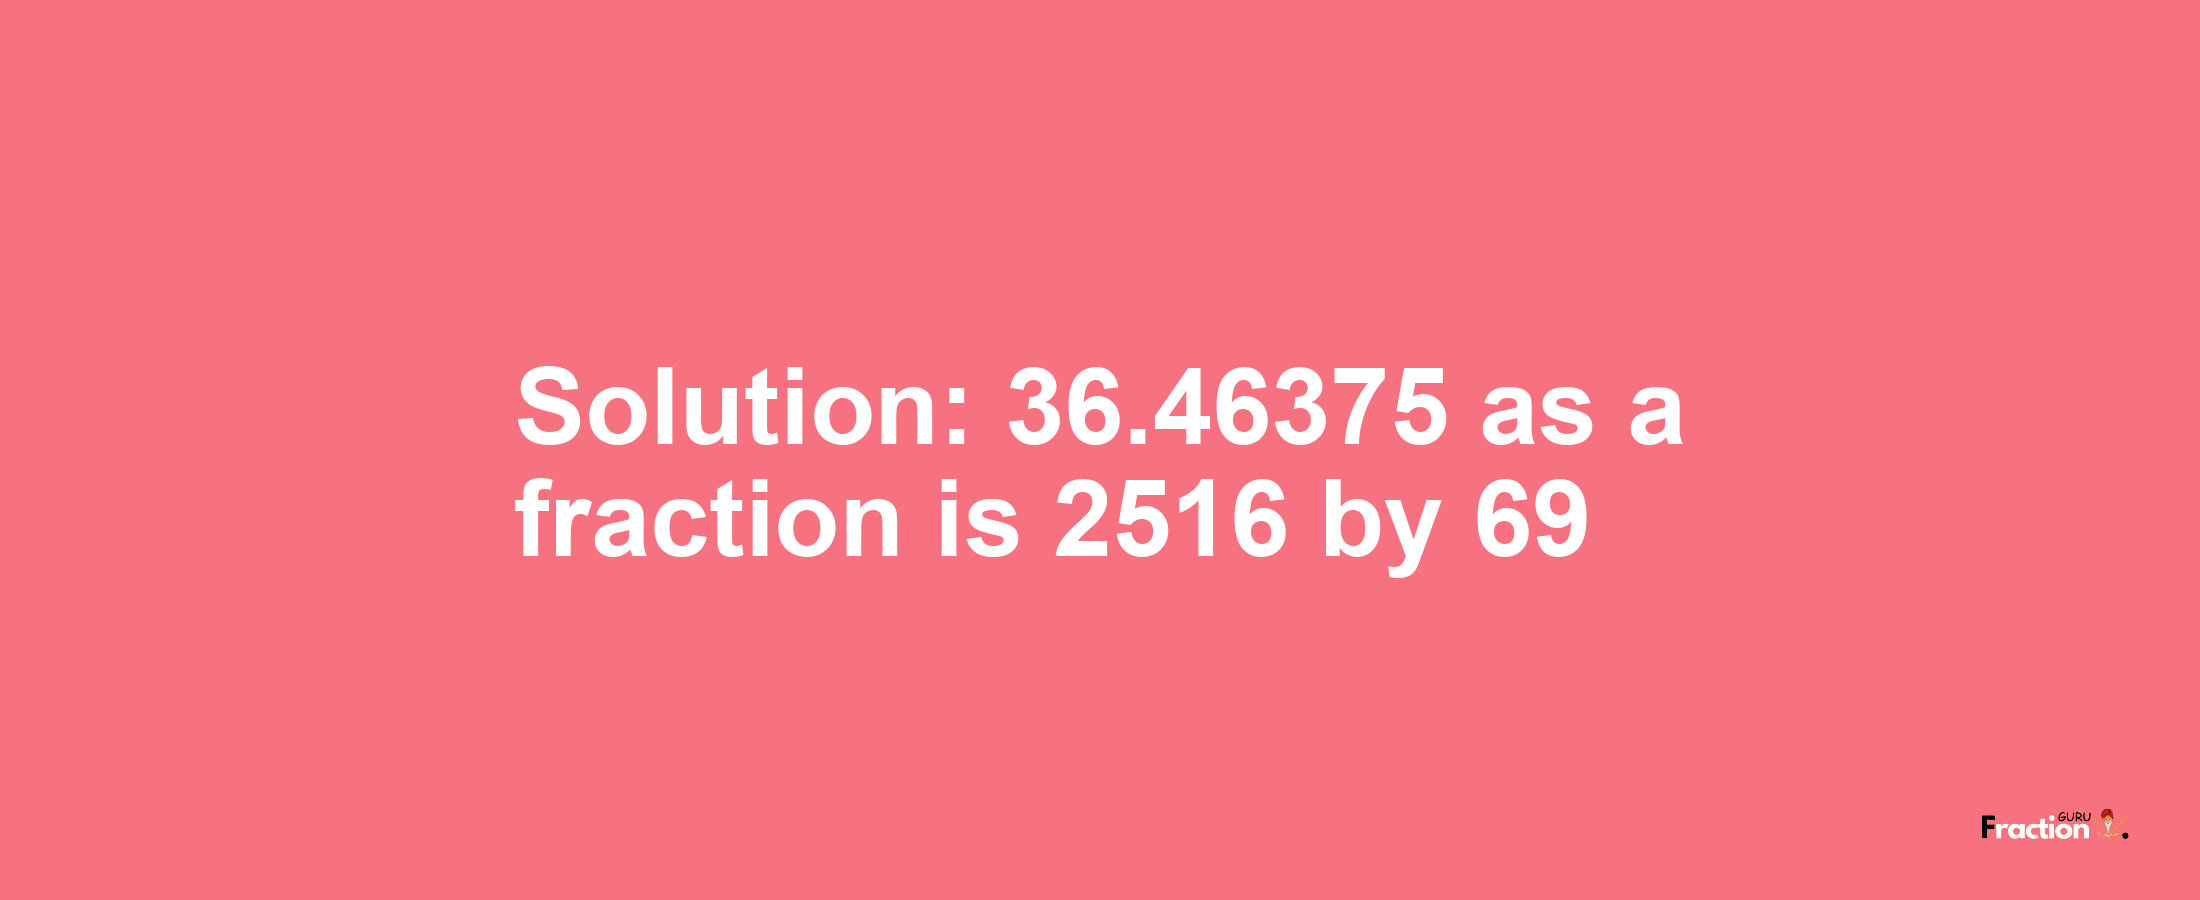 Solution:36.46375 as a fraction is 2516/69